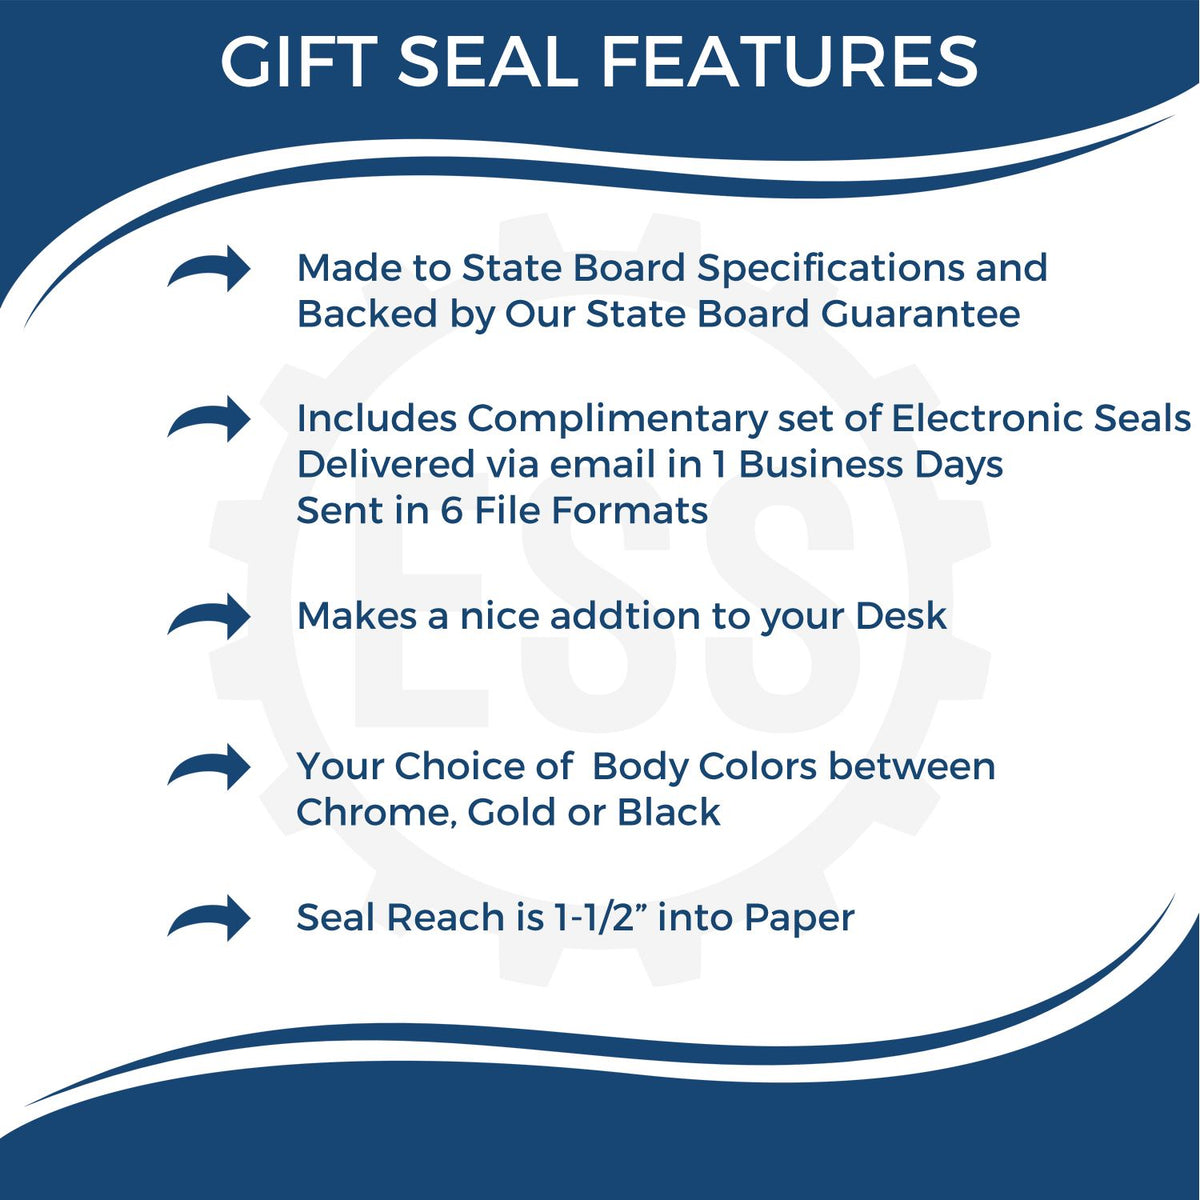 A picture of an infographic highlighting the selling points for the Gift New Jersey Geologist Seal